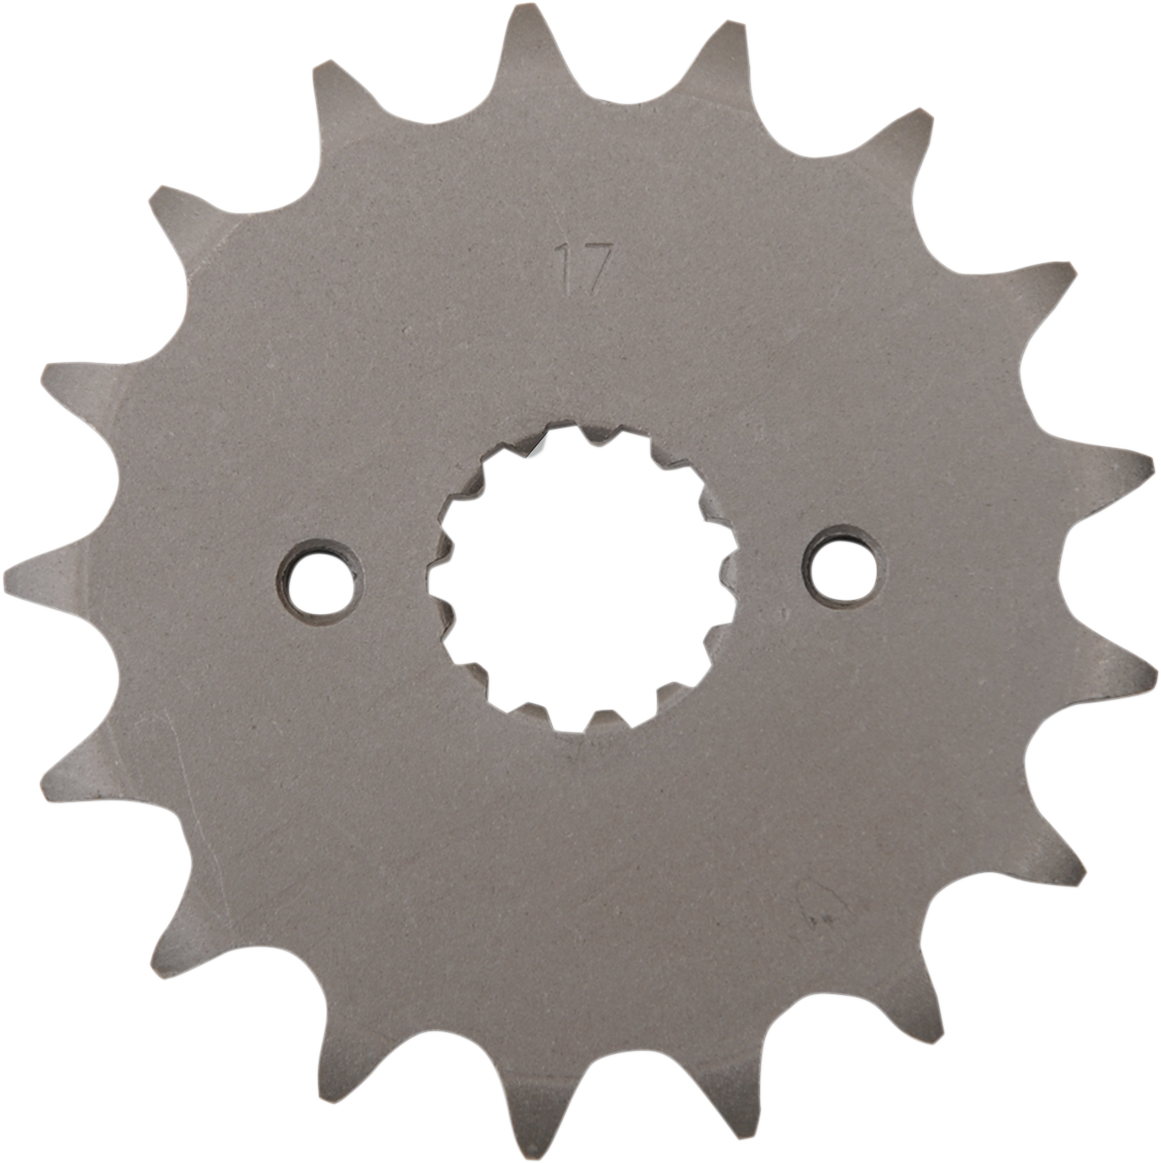 Parts Unlimited Countershaft Sprocket - 17-Tooth 13144-1009